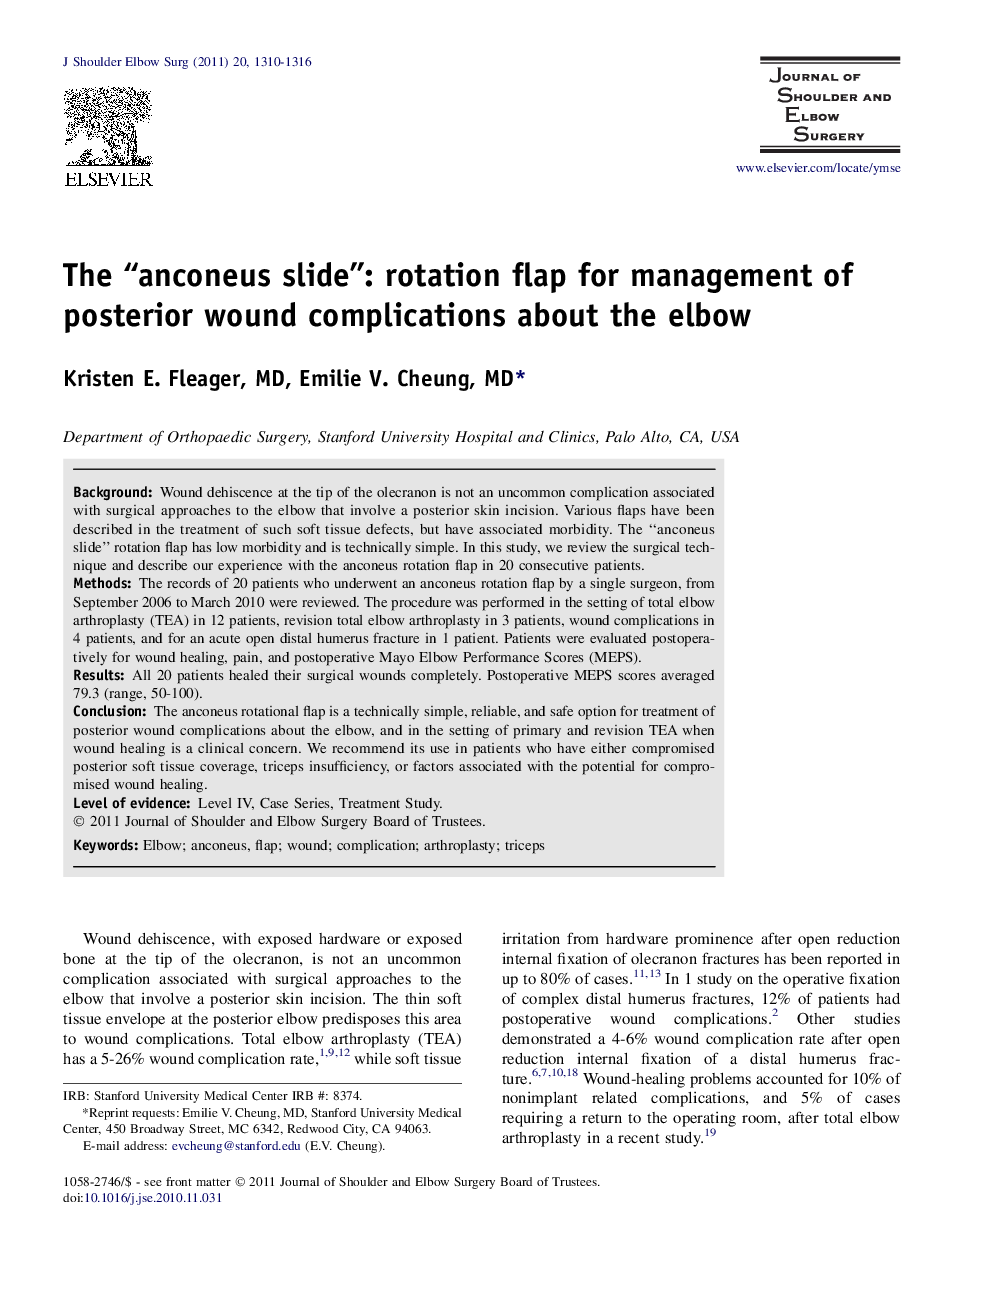 The “anconeus slide”: rotation flap for management of posterior wound complications about the elbow 